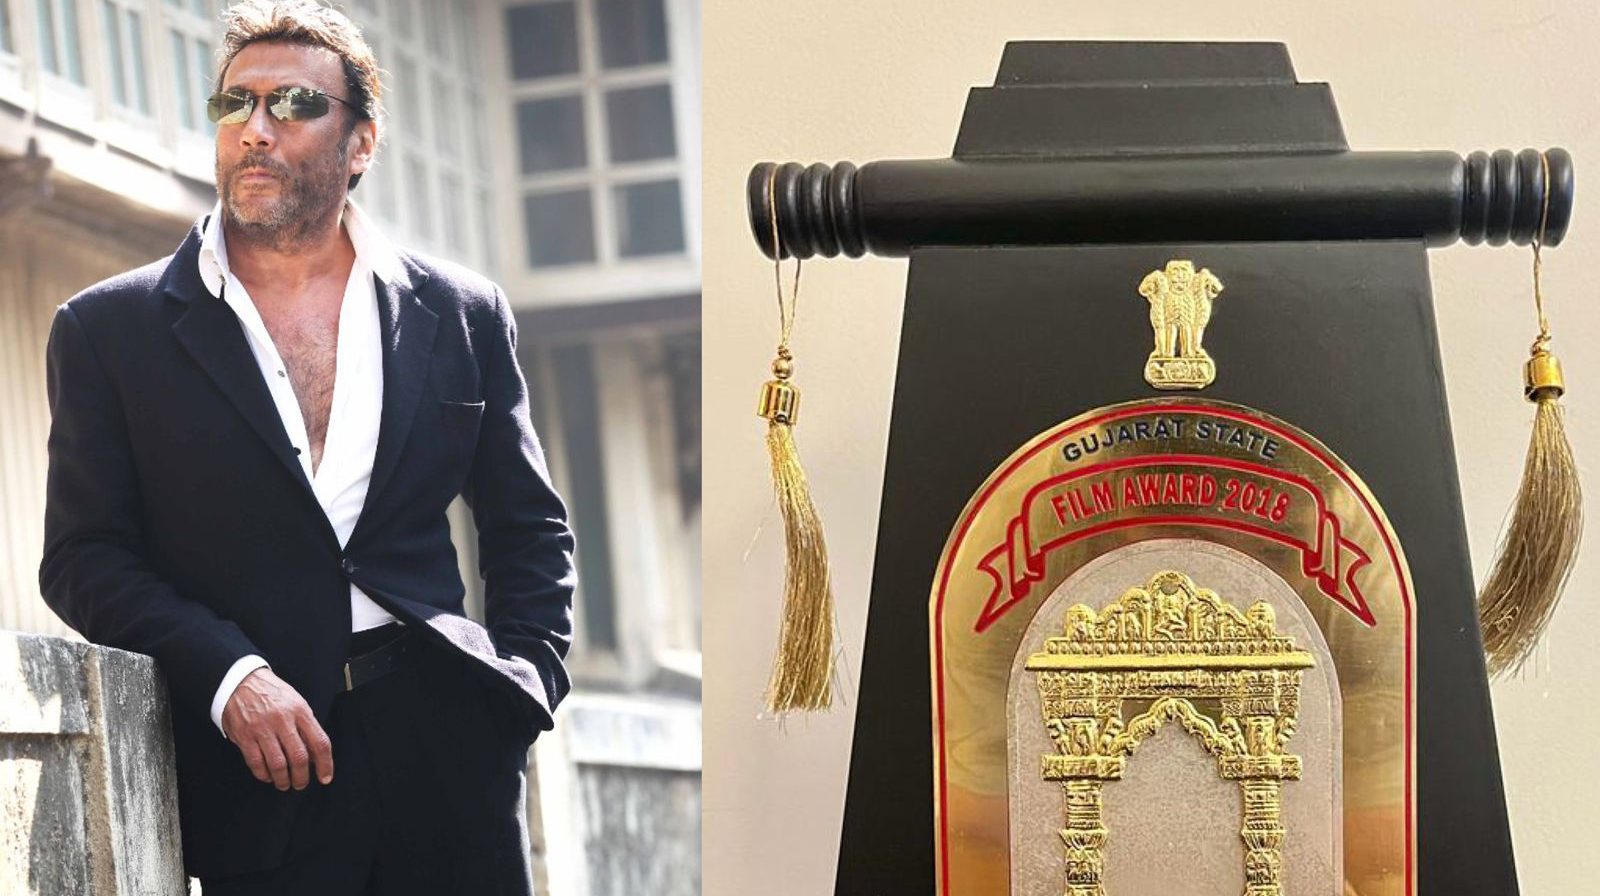 ‘Ventilator’ fetched Jackie Shroff an award from Gujarat State Government!